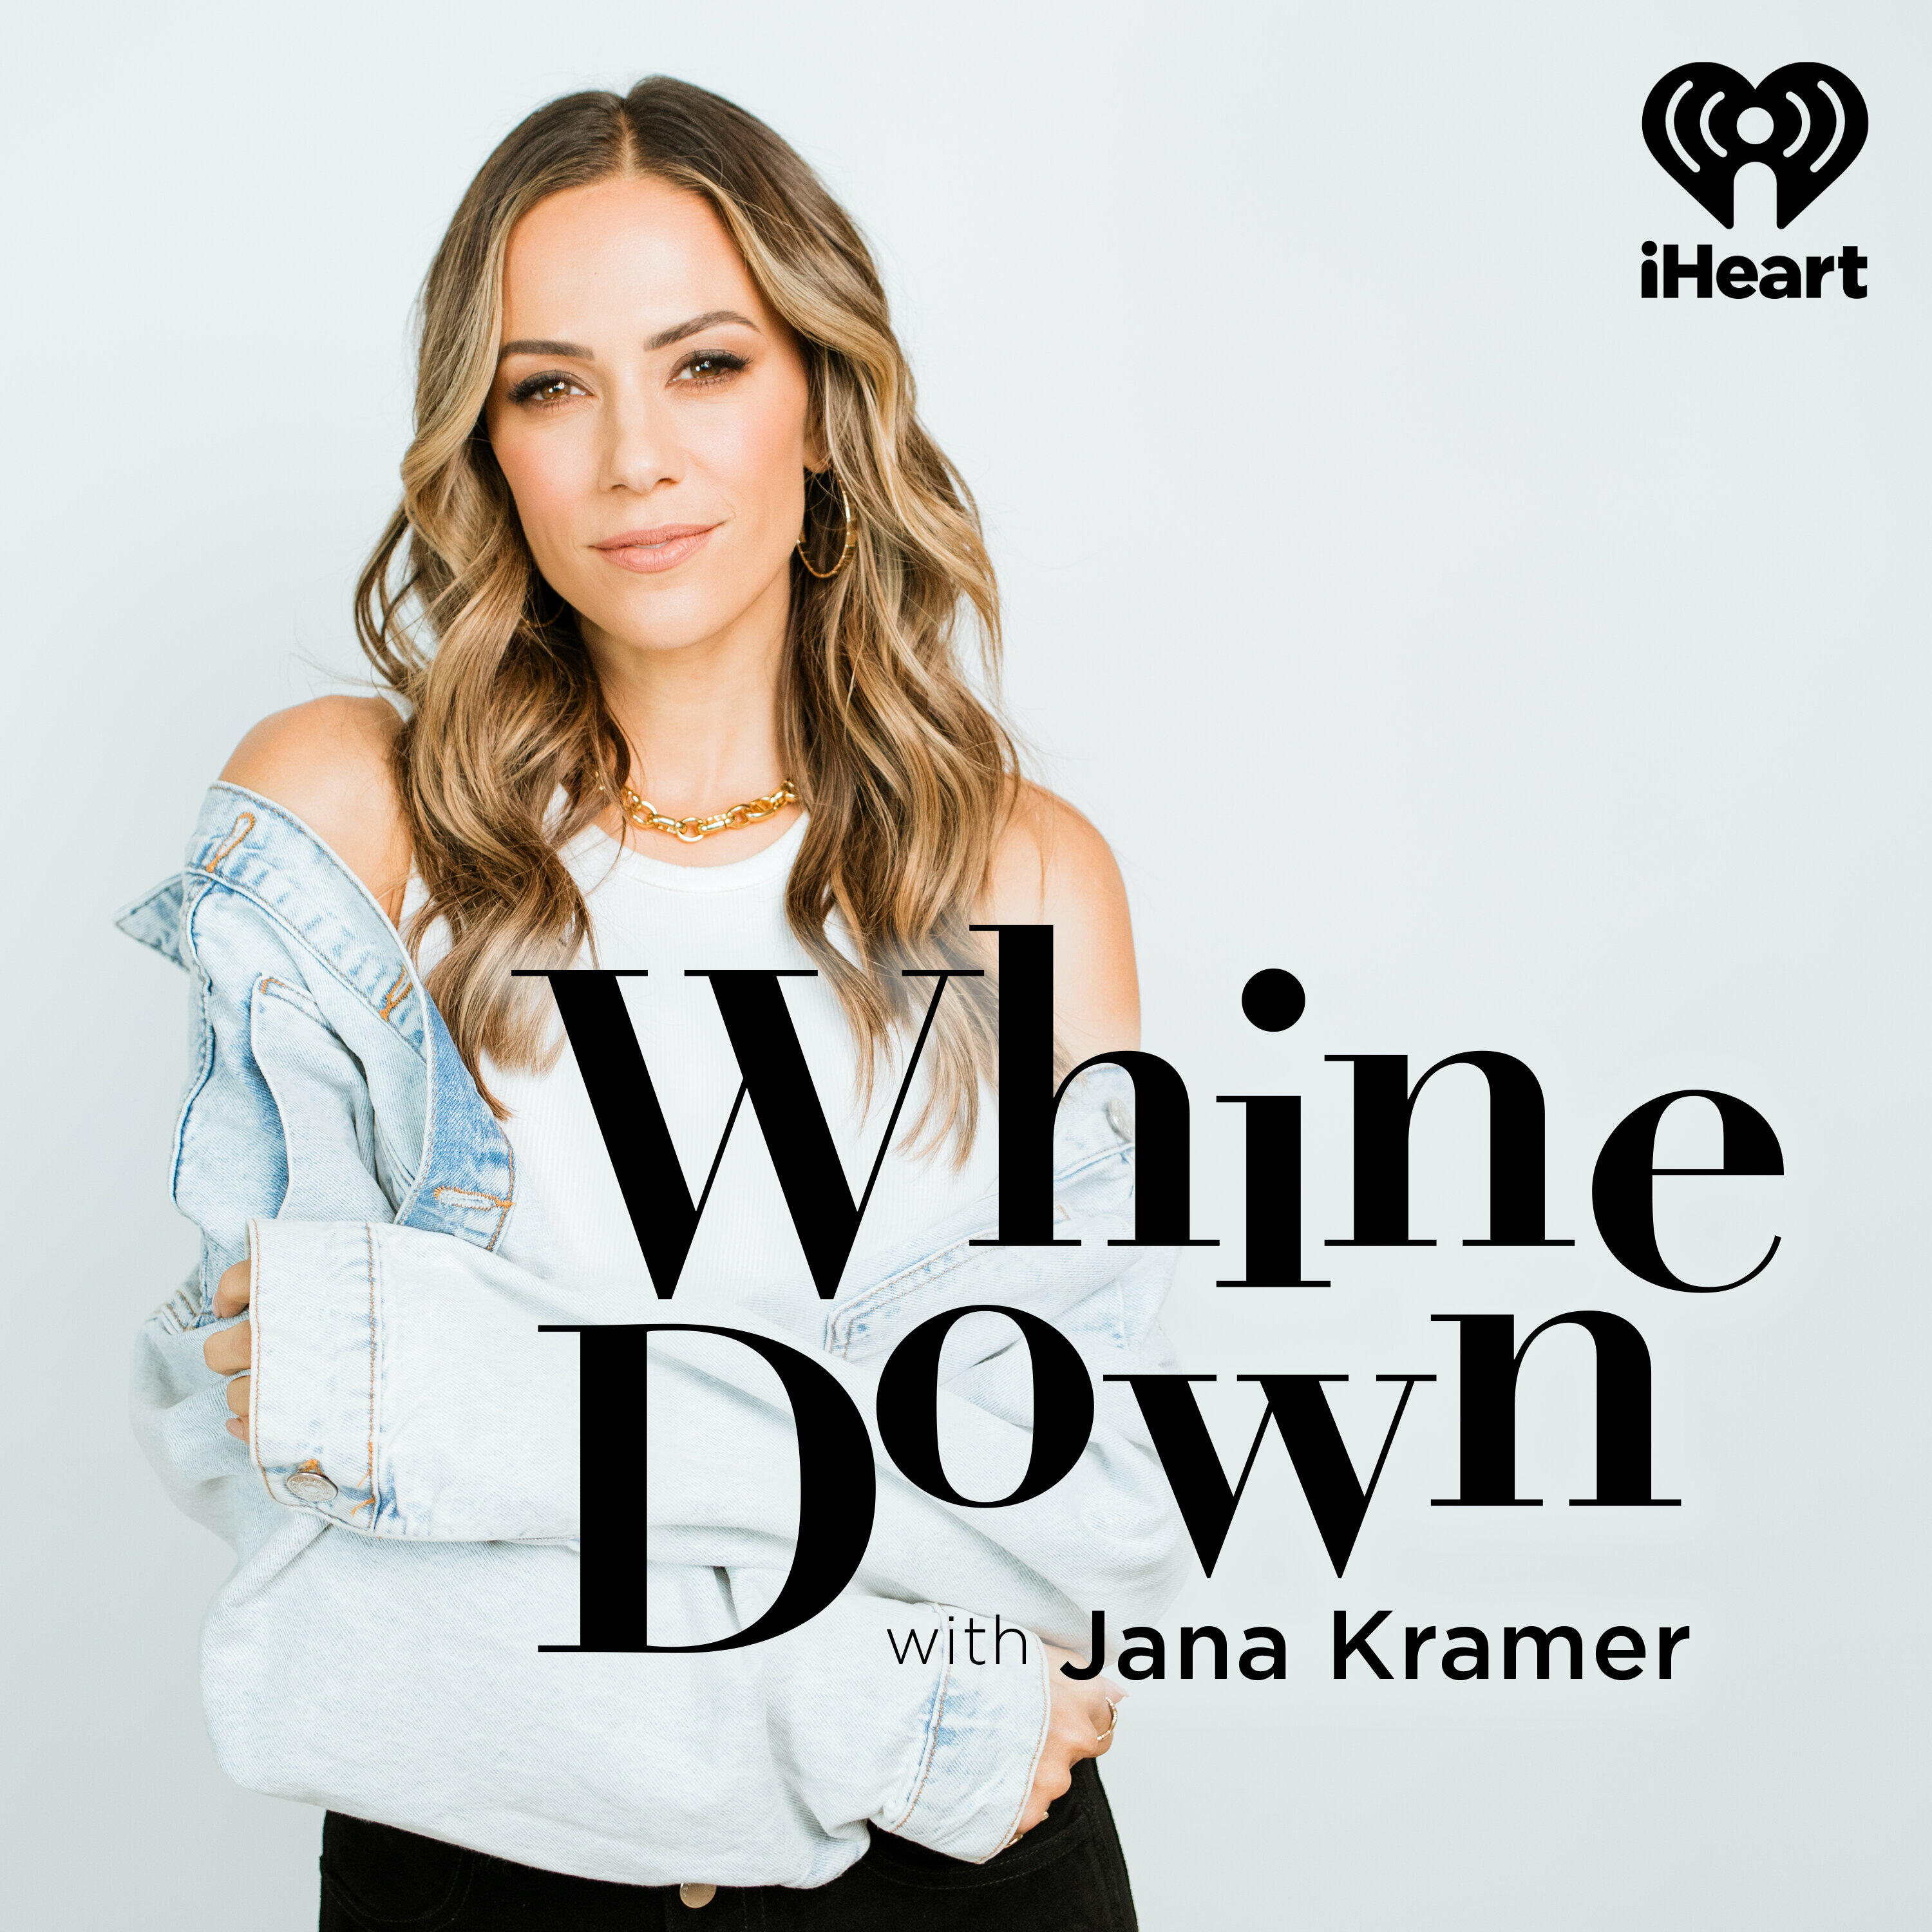 WAGs and Sister Wives - Whine Down with Jana Kramer